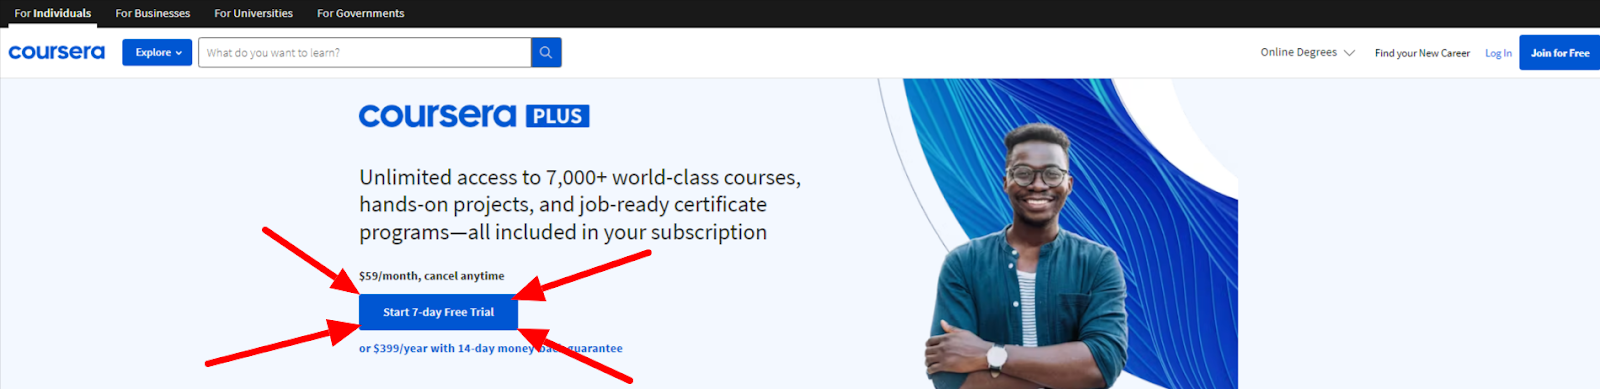 Coursera 7 Days Free Trial